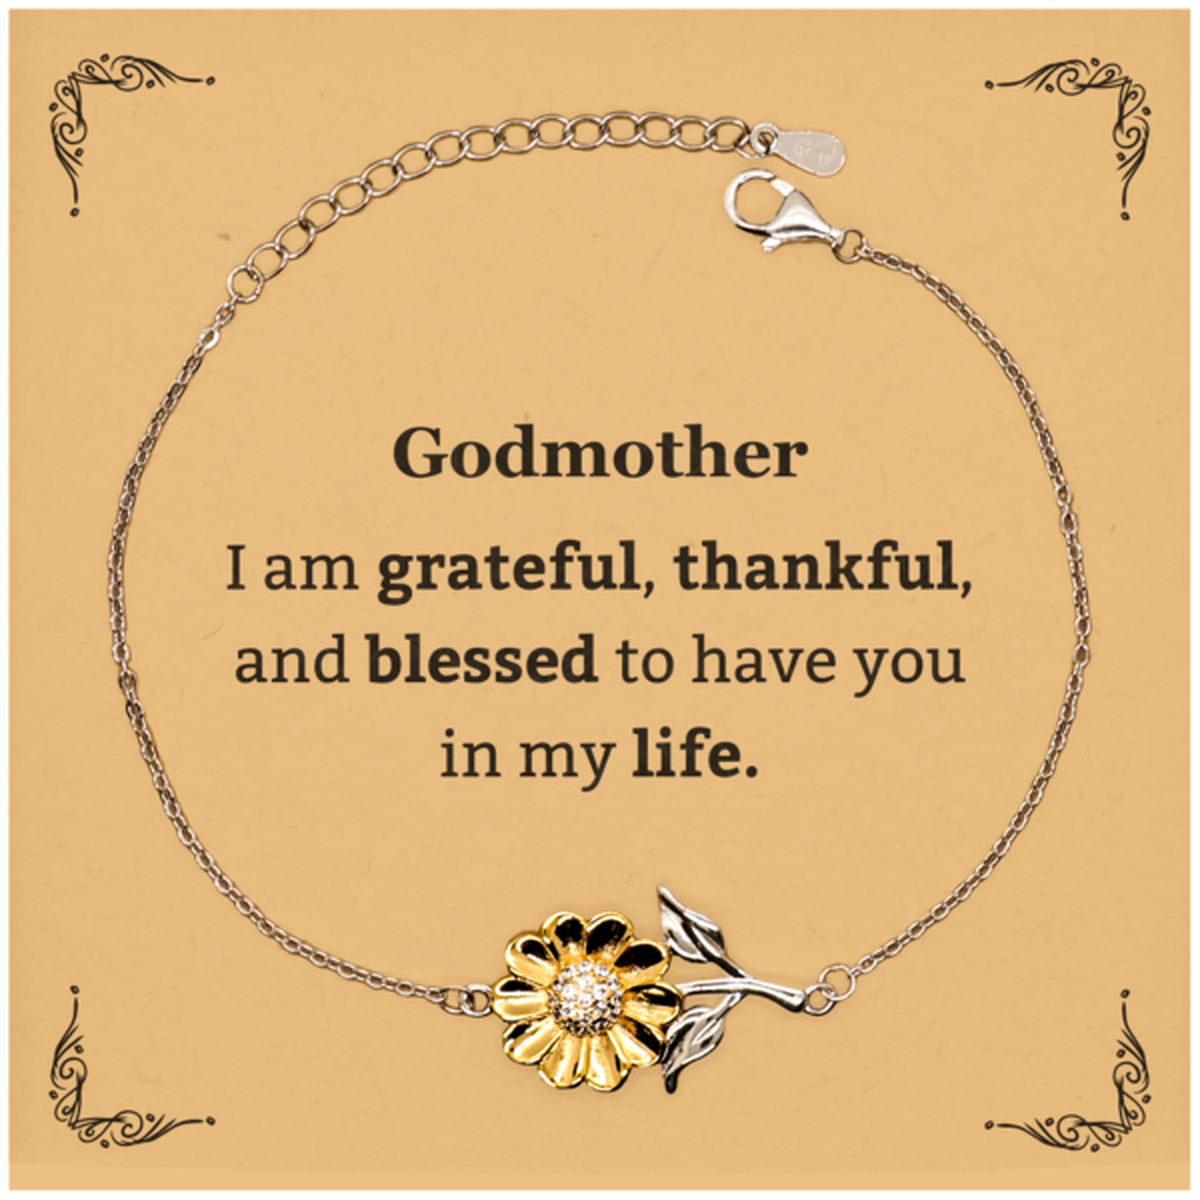 Godmother Appreciation Gifts, I am grateful, thankful, and blessed, Thank You Sunflower Bracelet for Godmother, Birthday Inspiration Gifts for Godmother